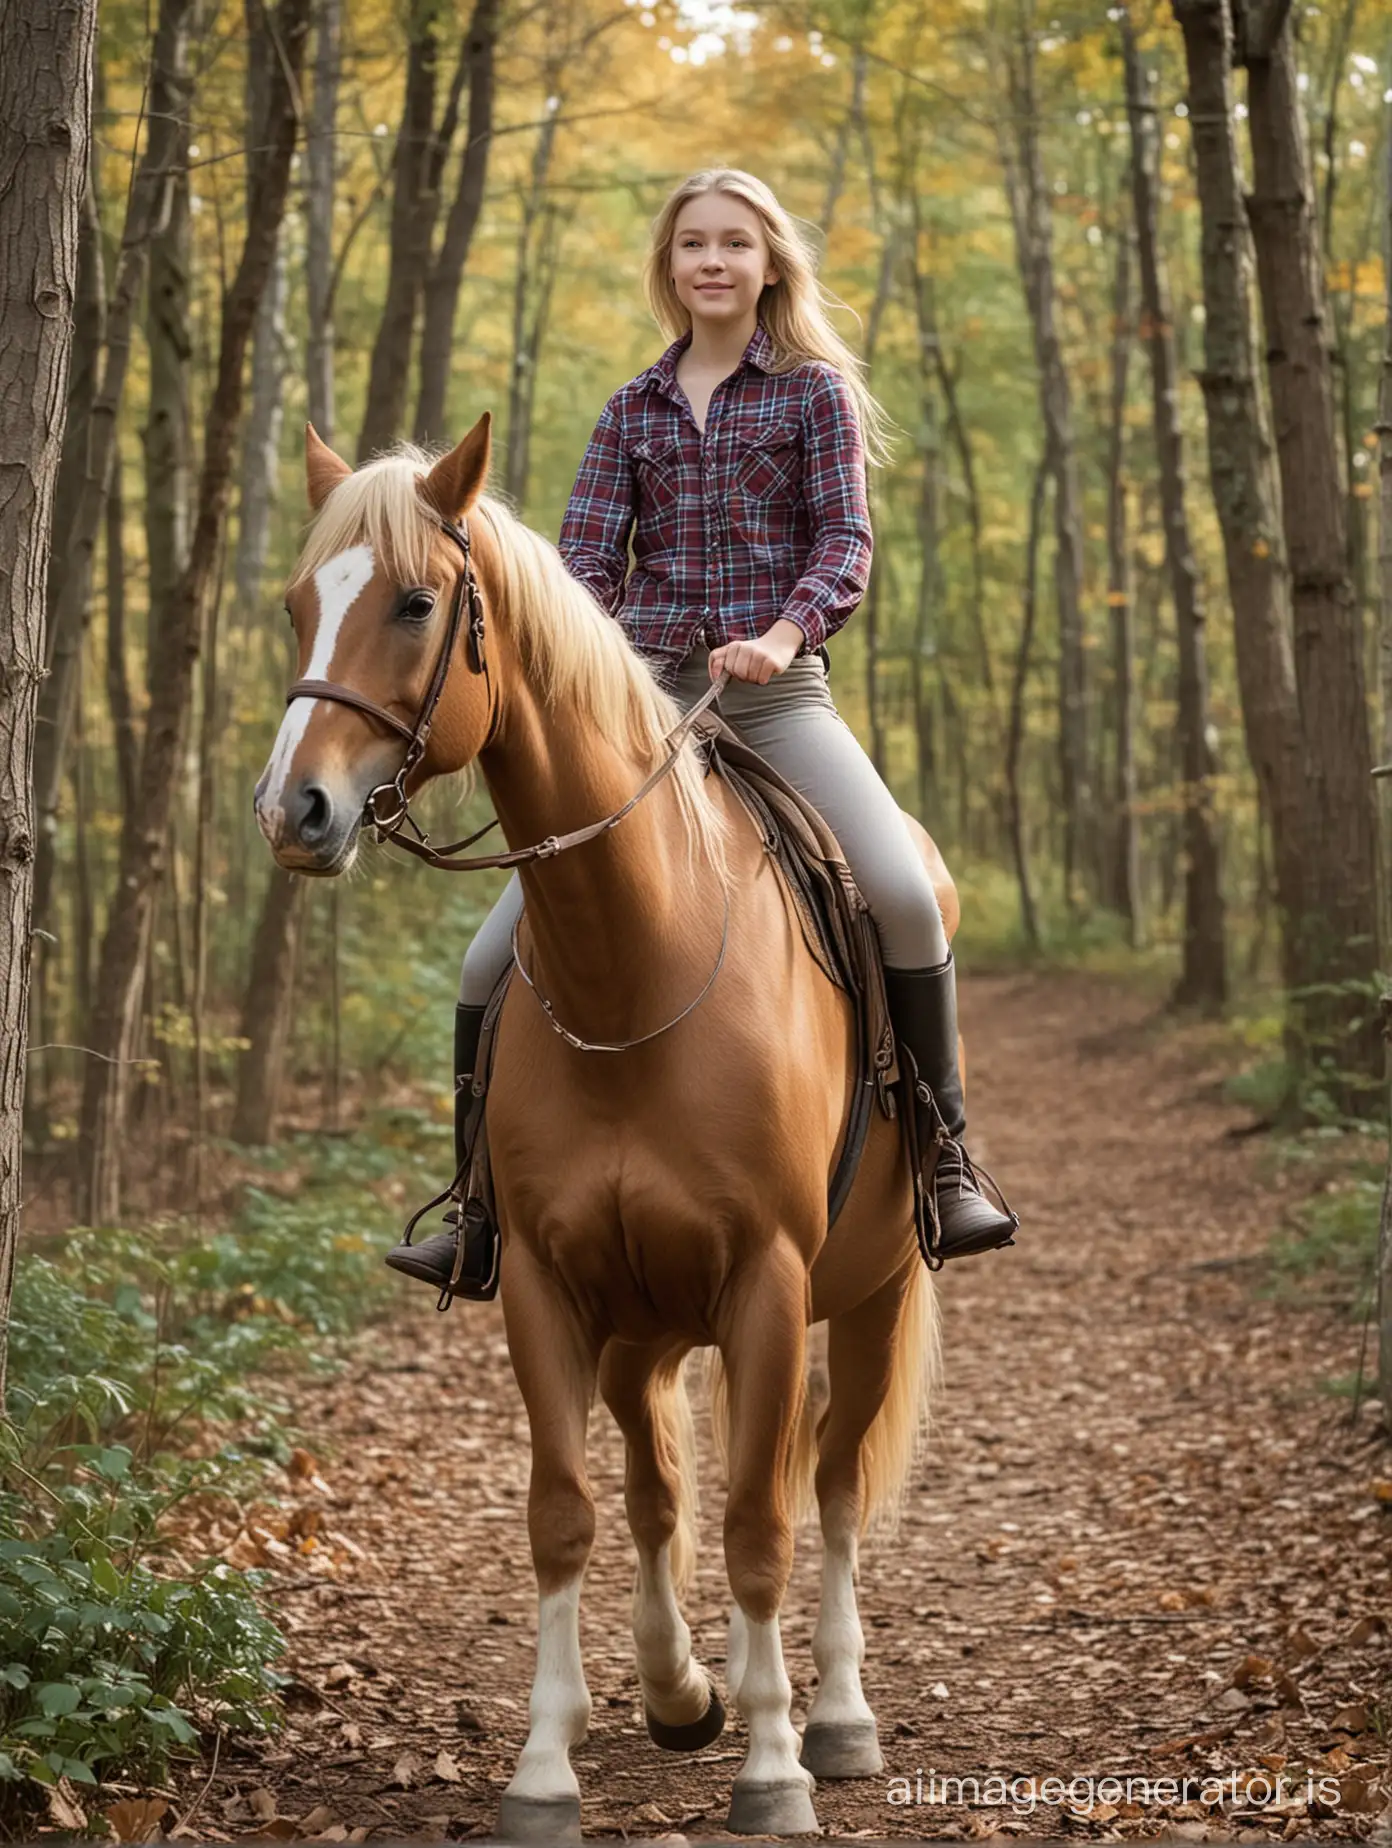 13 year old blonde country girl riding a horse in the woods, mythical woods